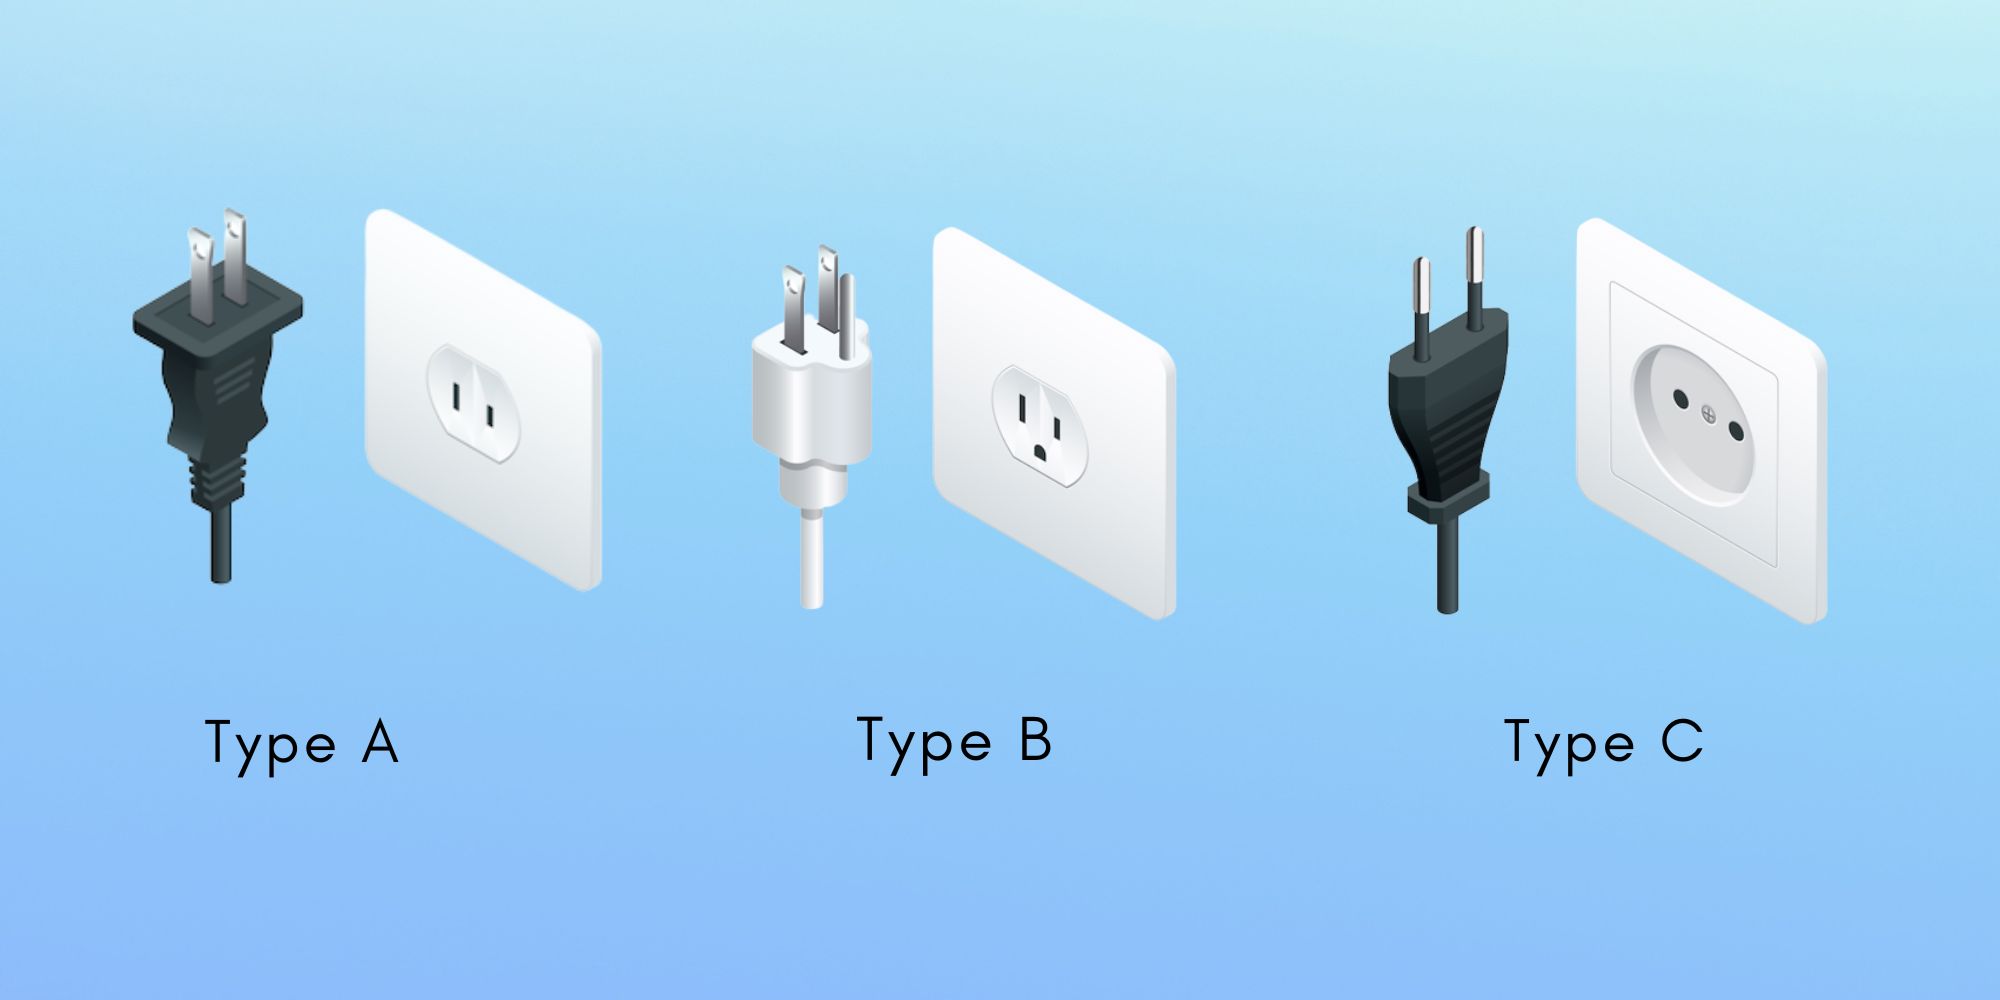 Thailand Power Plugs and Sockets: Type A, Type B, and Type C
